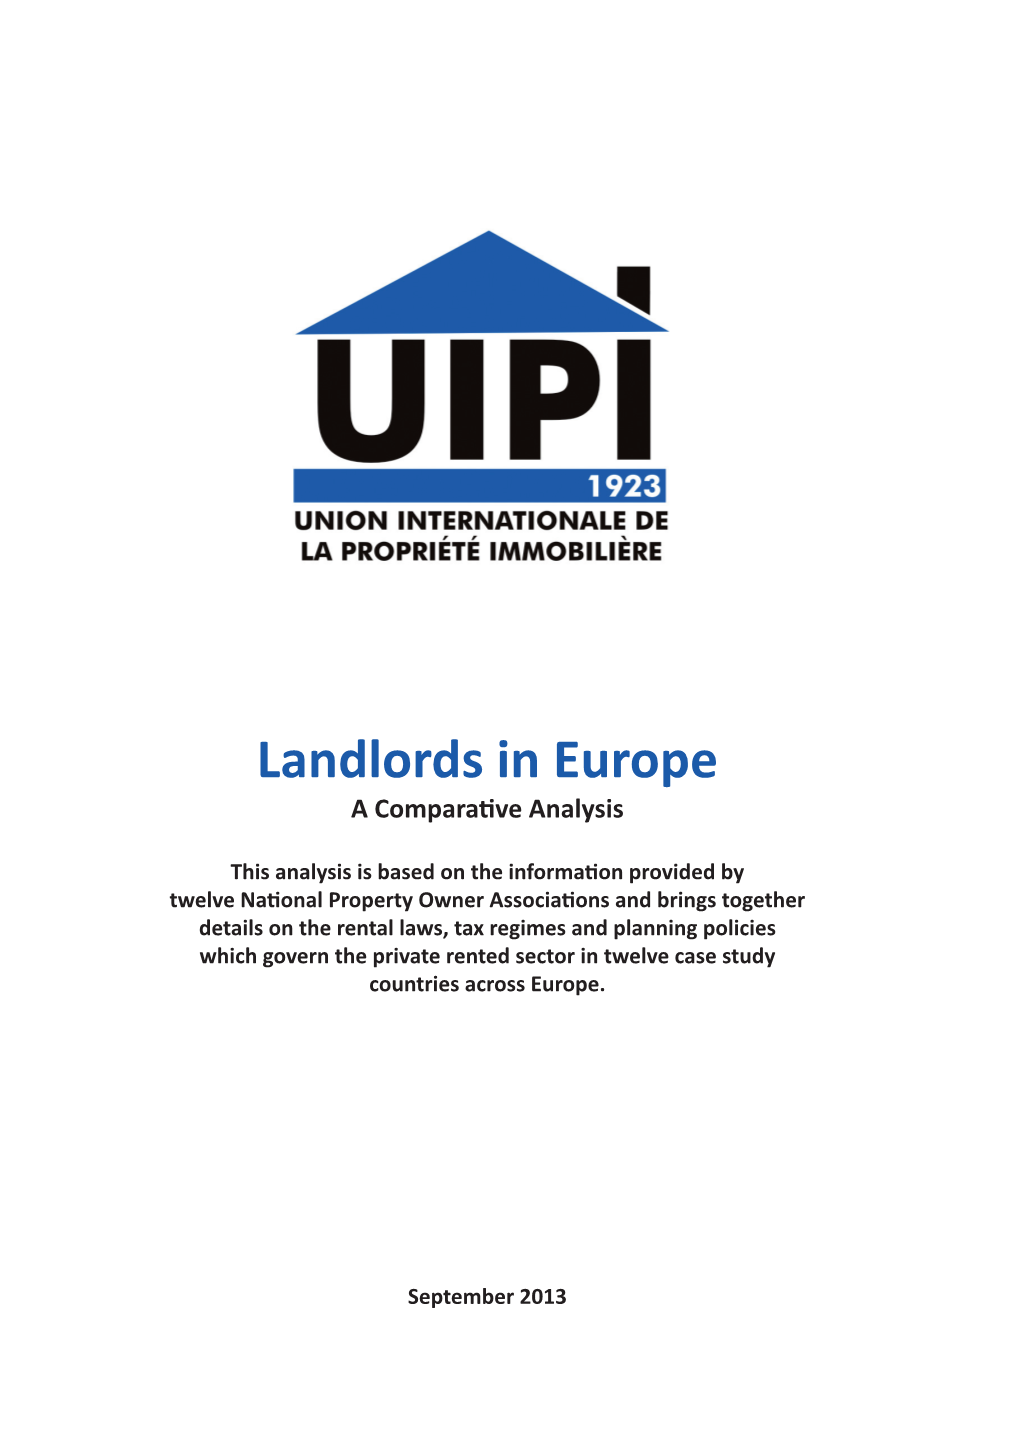 Landlords in Europe a Comparative Analysis